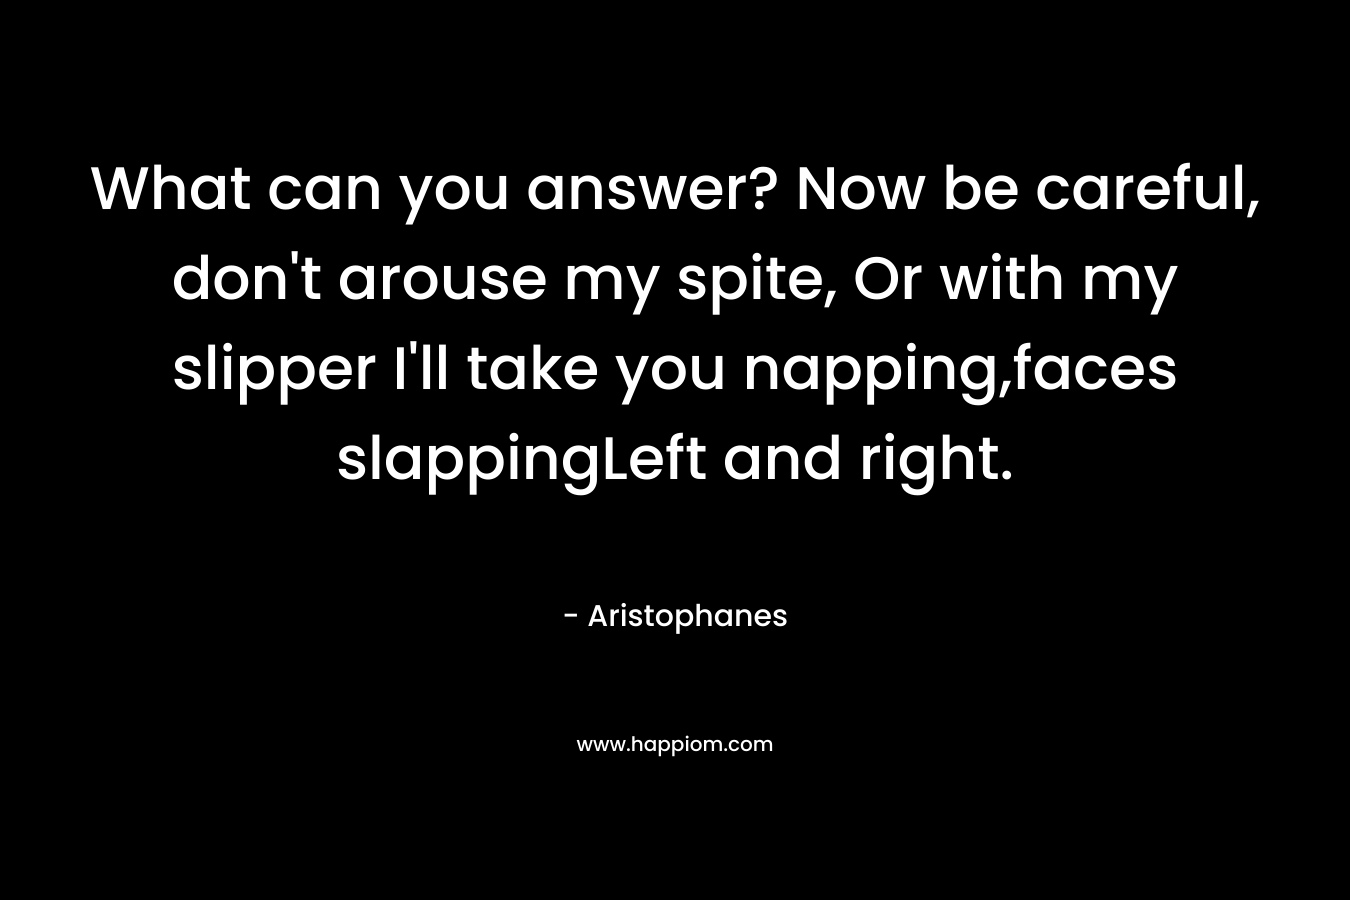 What can you answer? Now be careful, don’t arouse my spite, Or with my slipper I’ll take you napping,faces slappingLeft and right. – Aristophanes